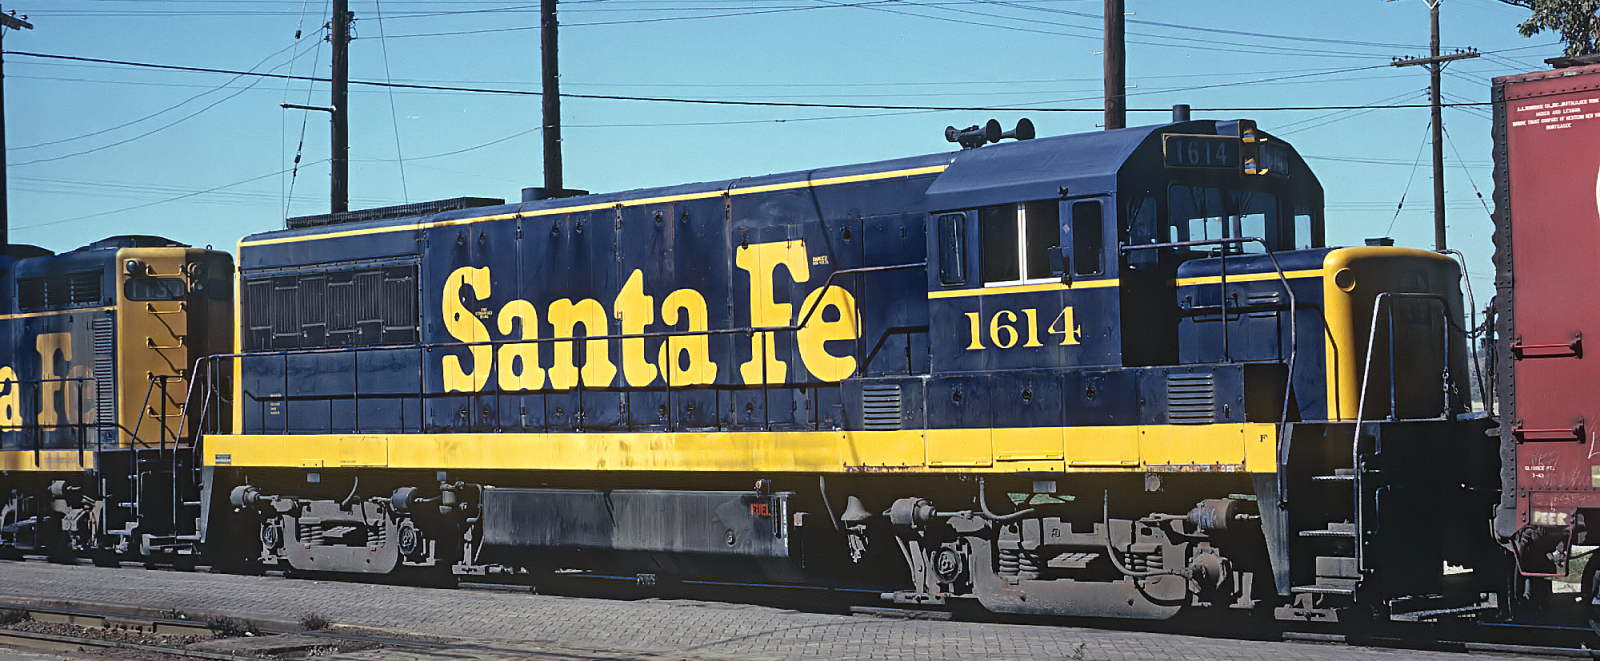 ATSF No. 1614 in October 1966 in Chillicothe, Illinois